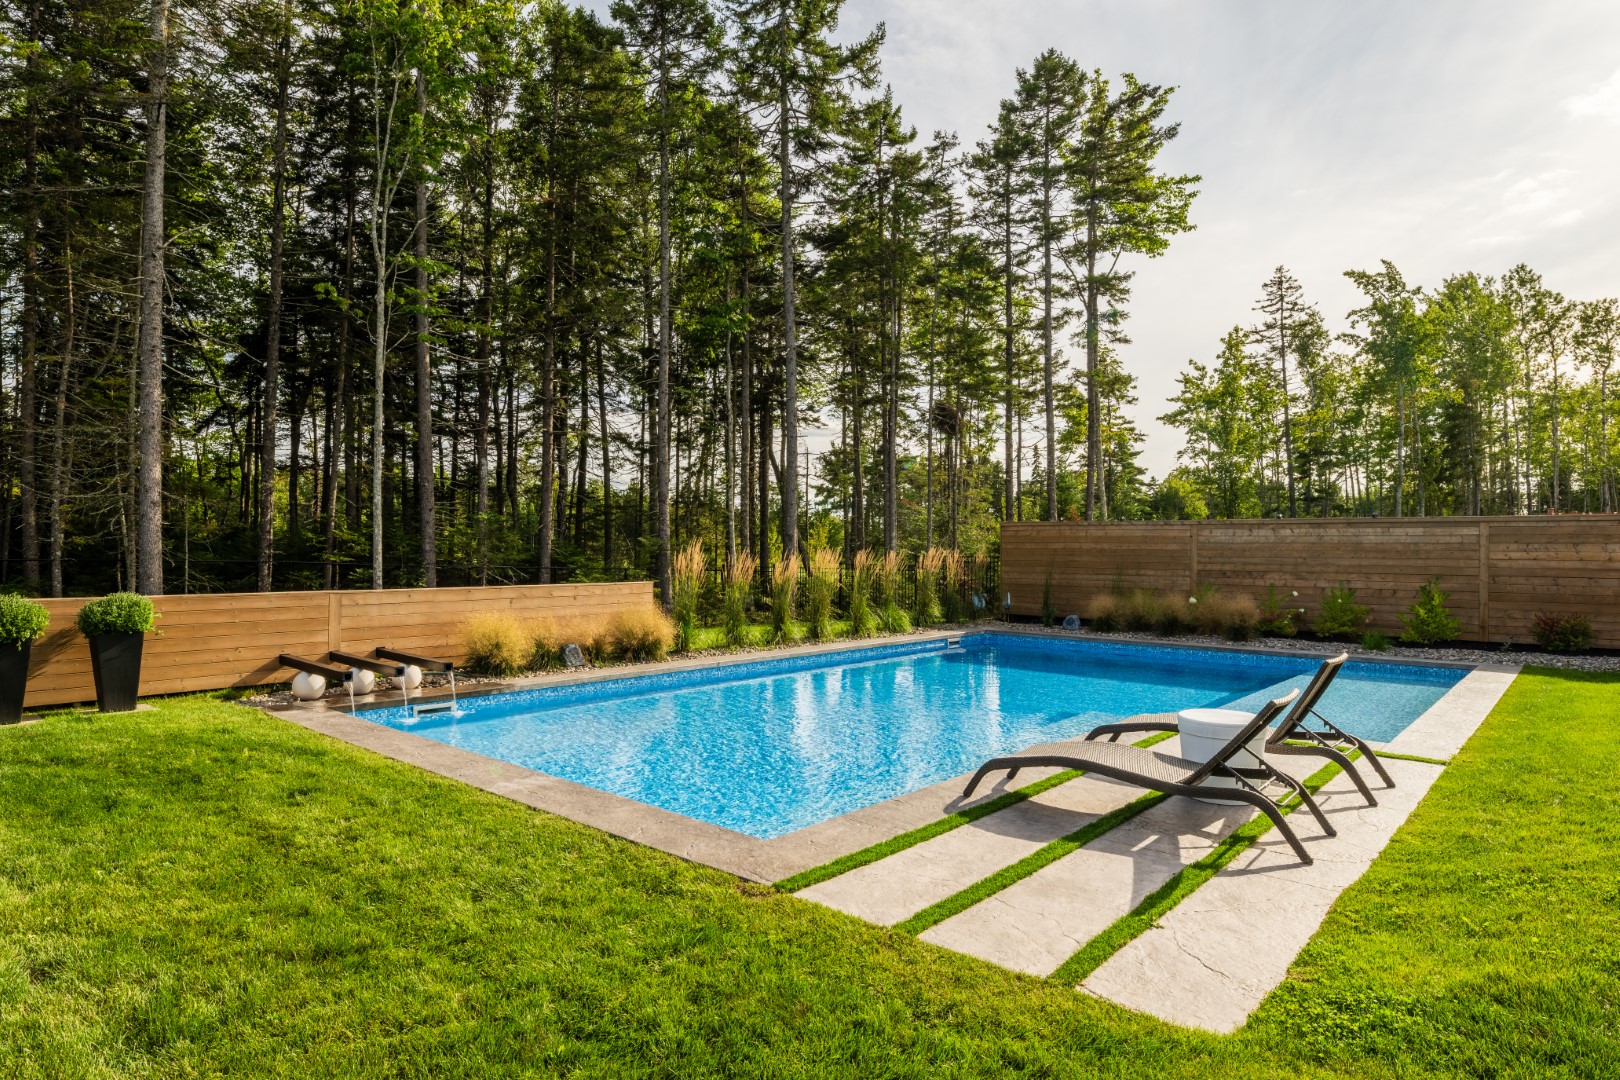 Back garden residential luxury swimming pool with water feature and sun loungers, Moncton NB